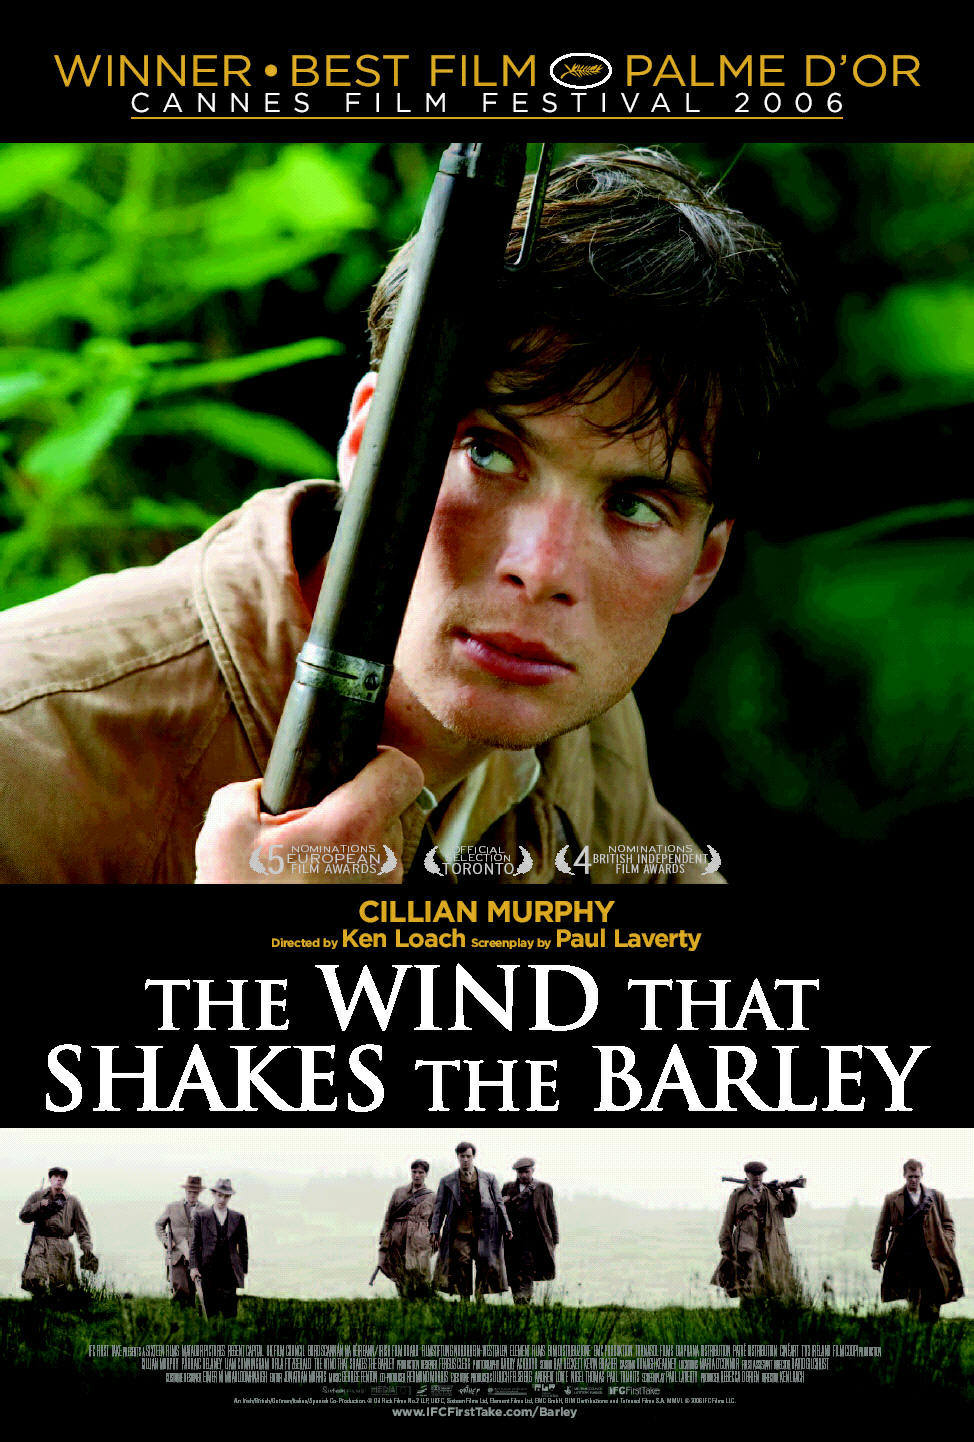 the-wind-that-shakes-the-barley-movie-poster.jpg